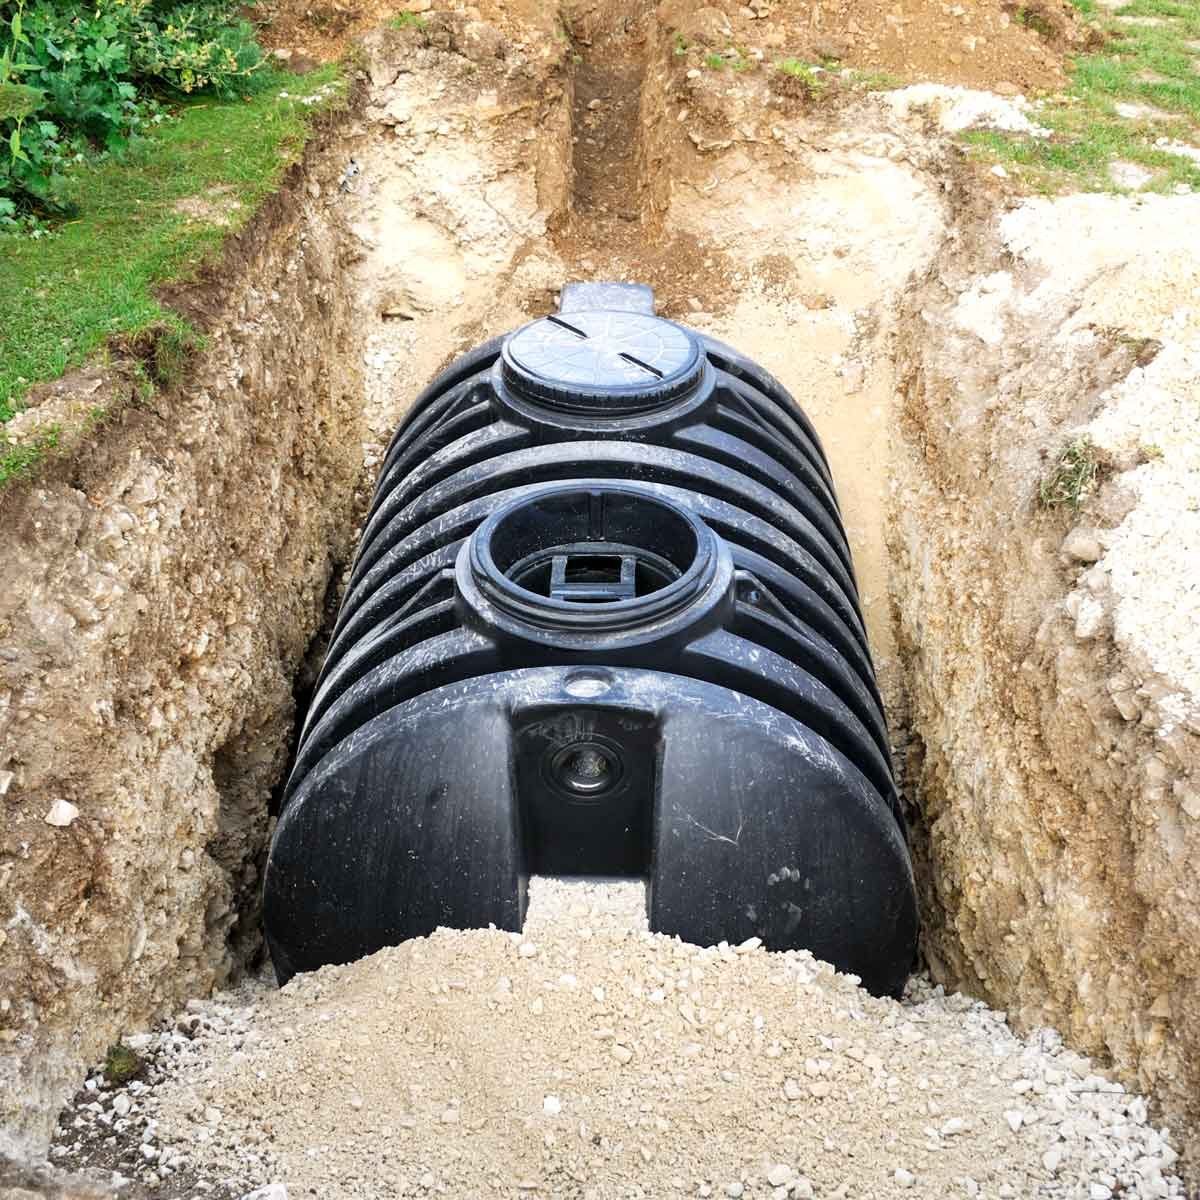 [Image: septic-tank-GettyImages-183280054.jpg]